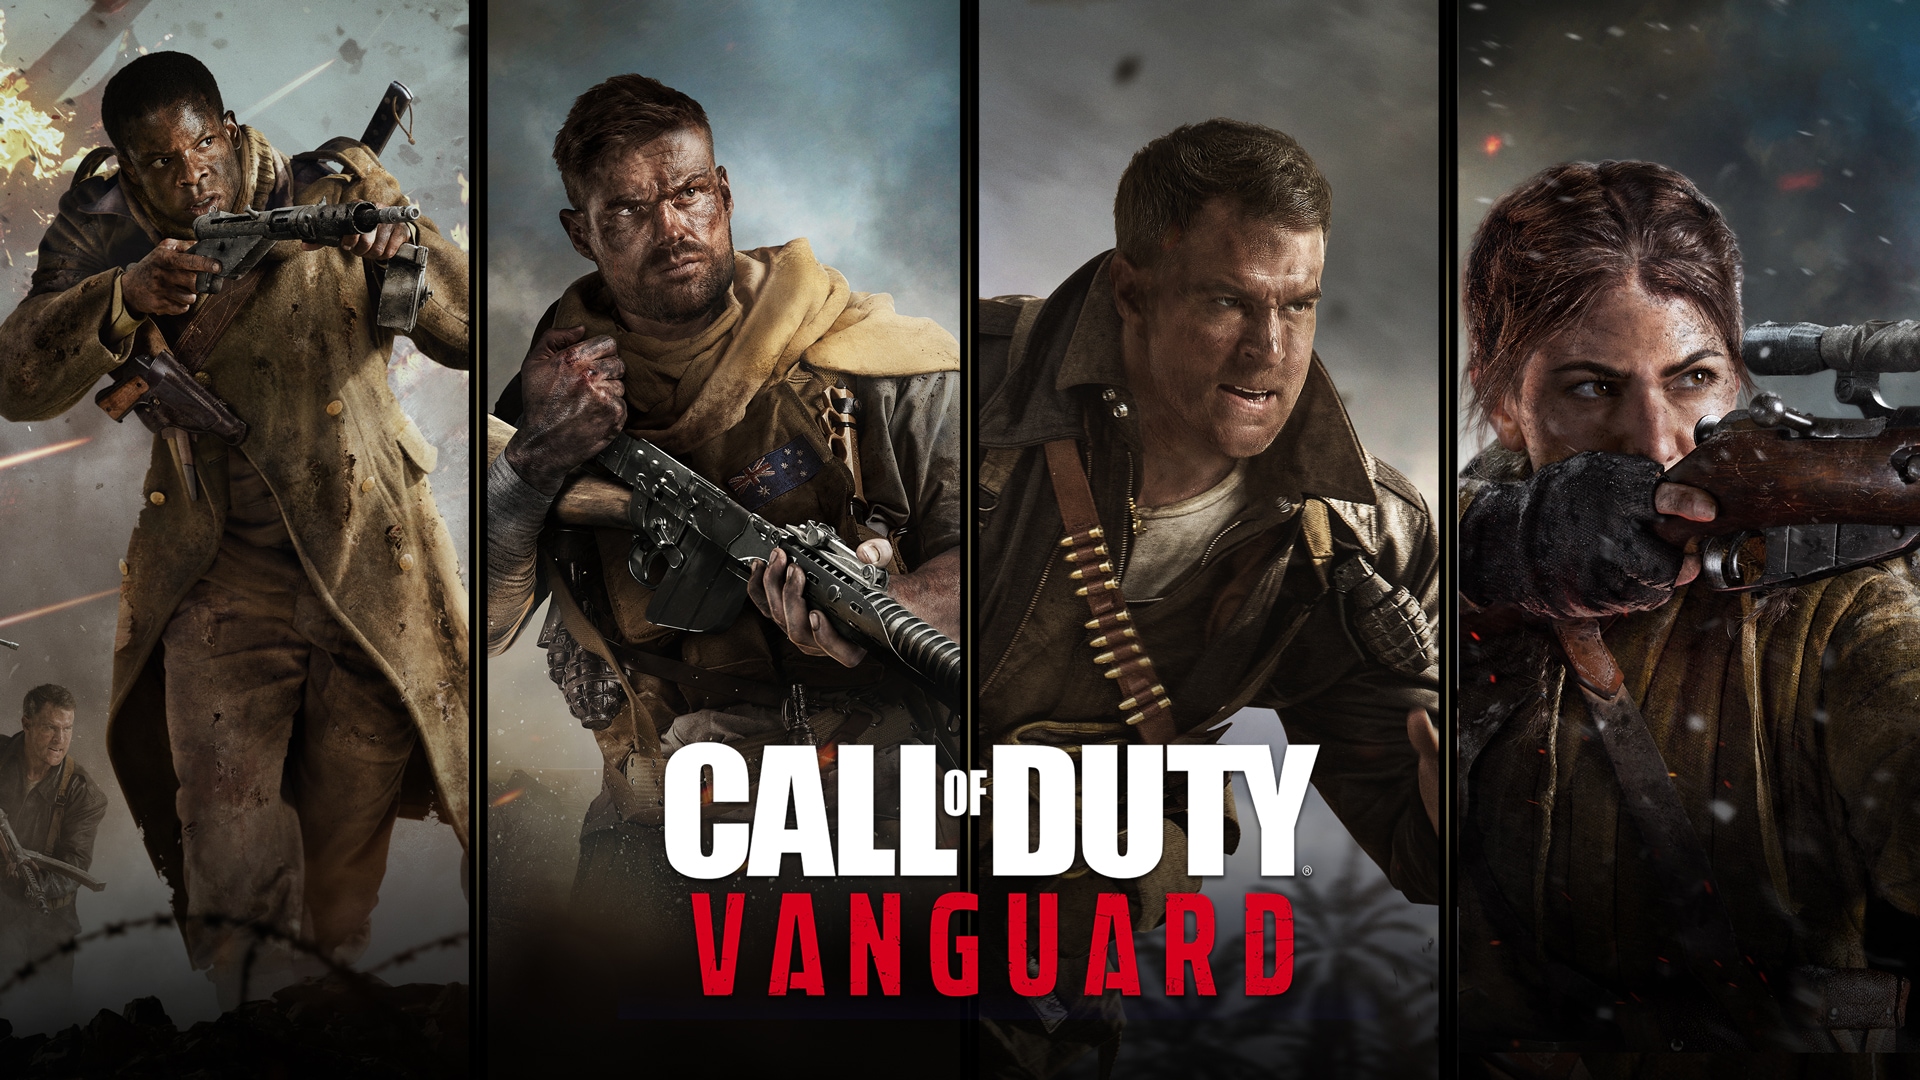 Celebrate Vanguard’s launch with a Call of Duty: Mobile reward